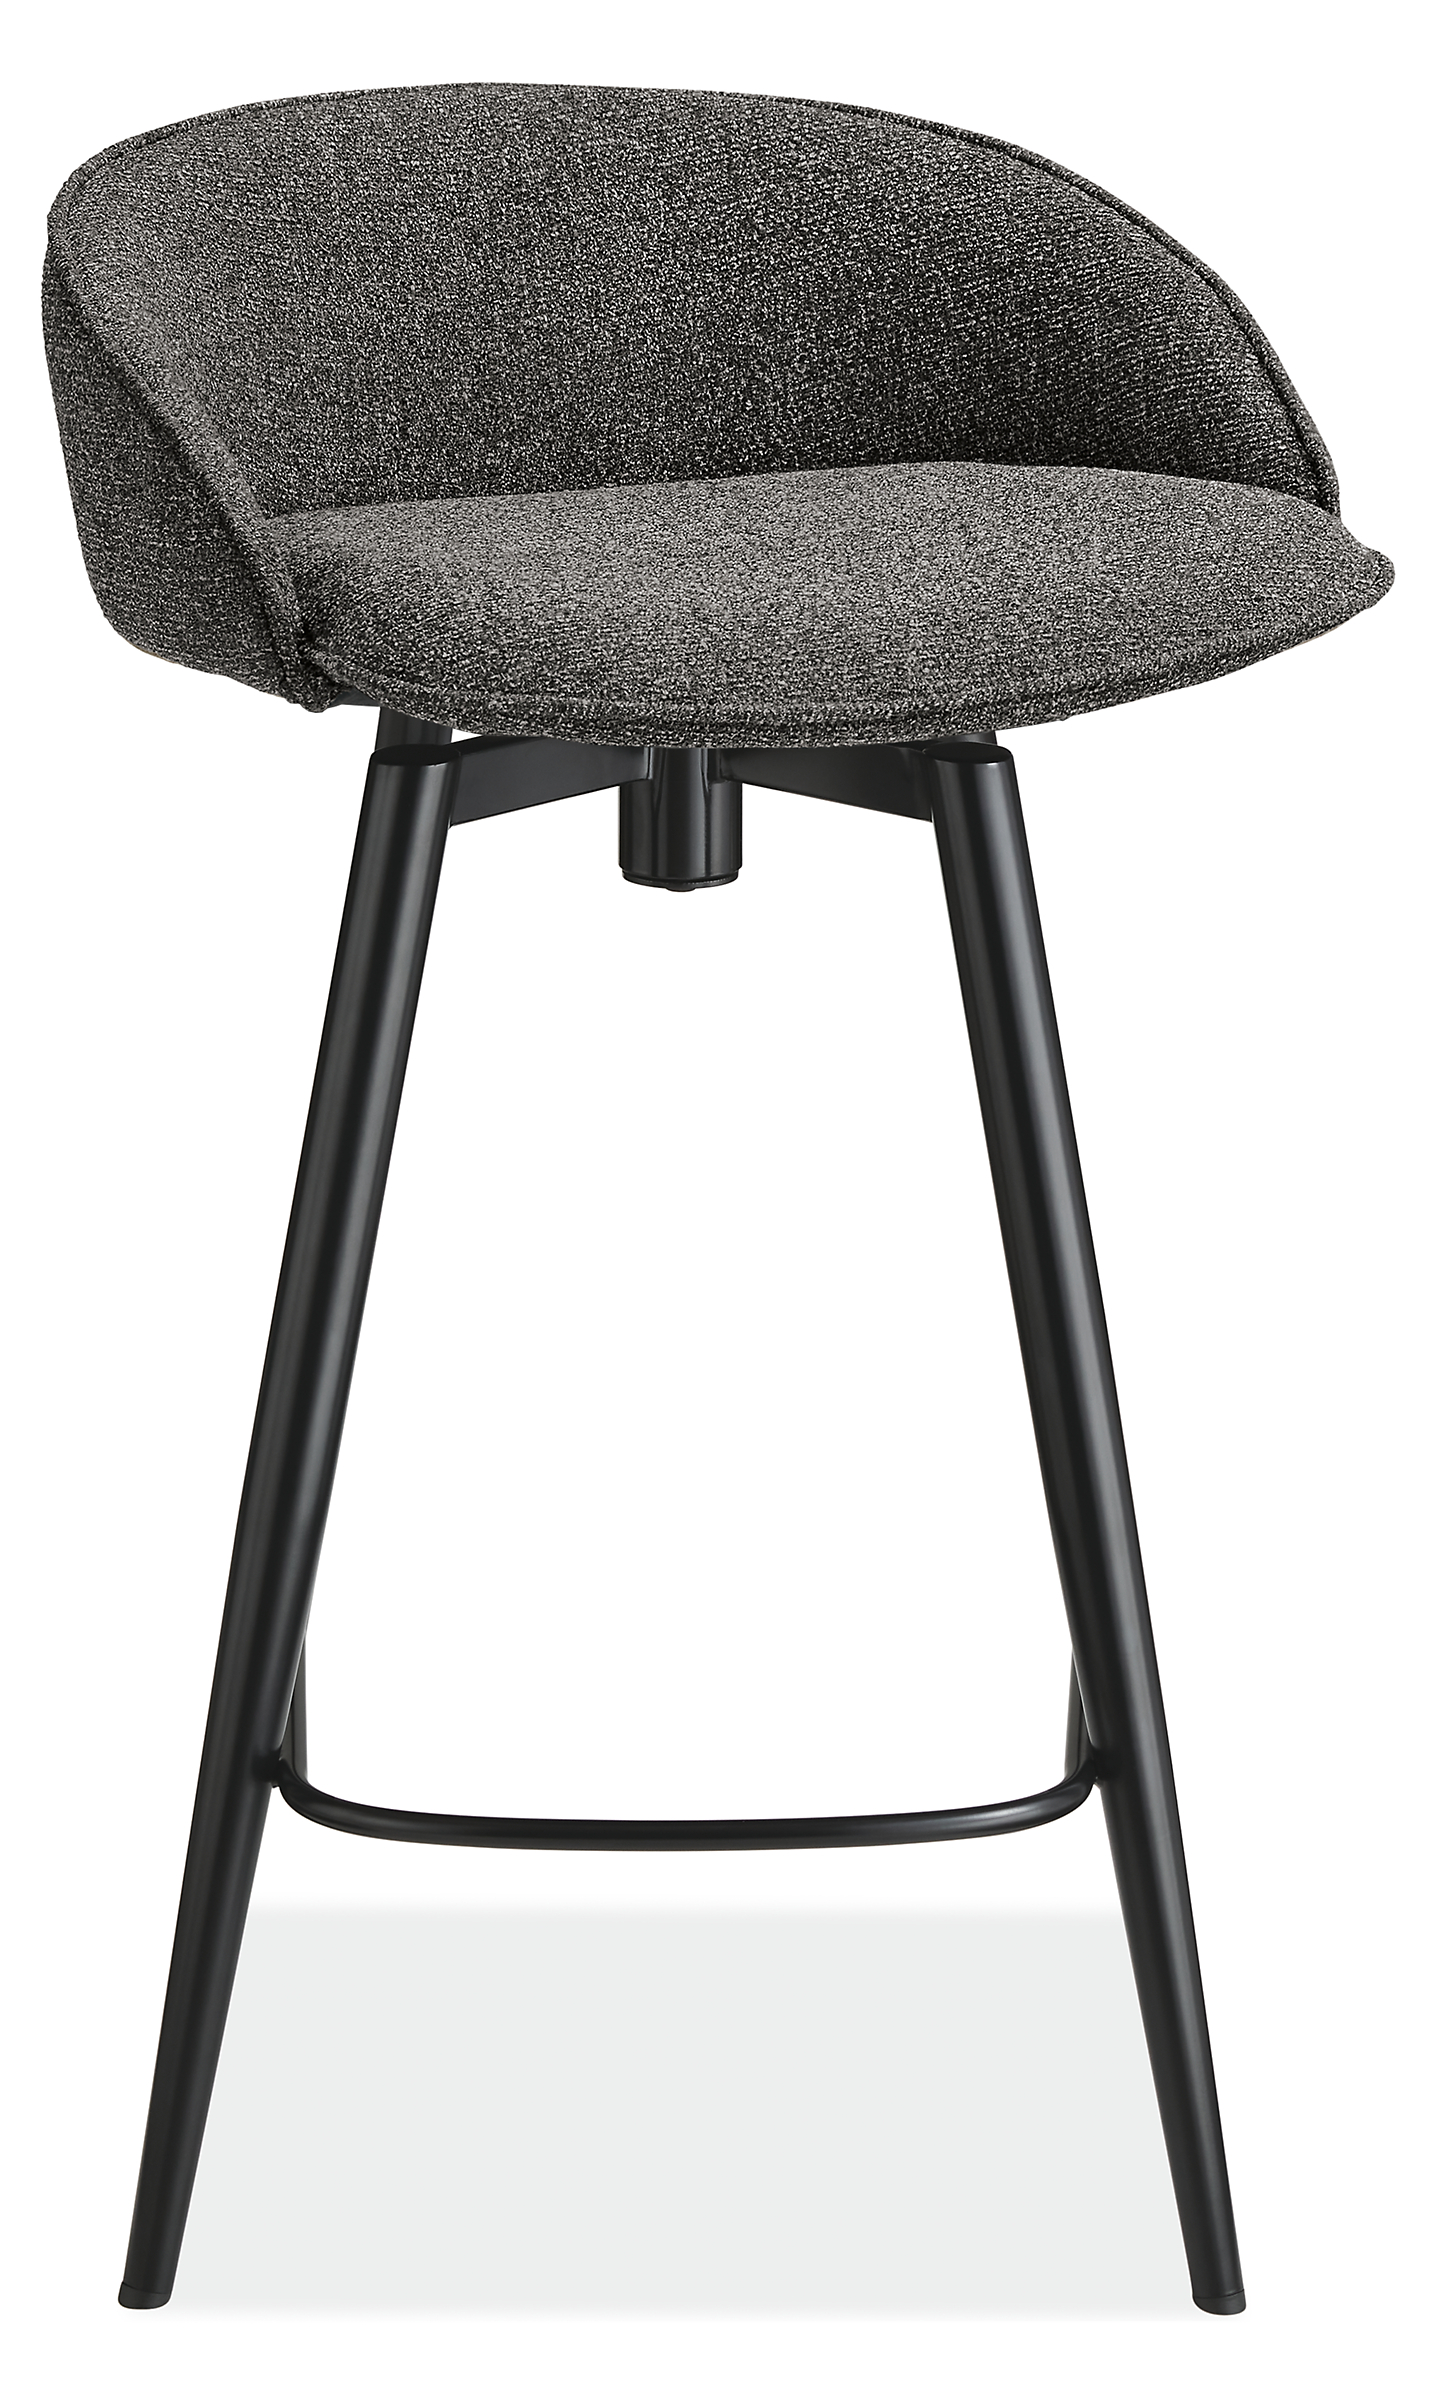 Swiveled view of Sylvan Swivel Counter Stool in Radford Grey Fabric and graphite base.